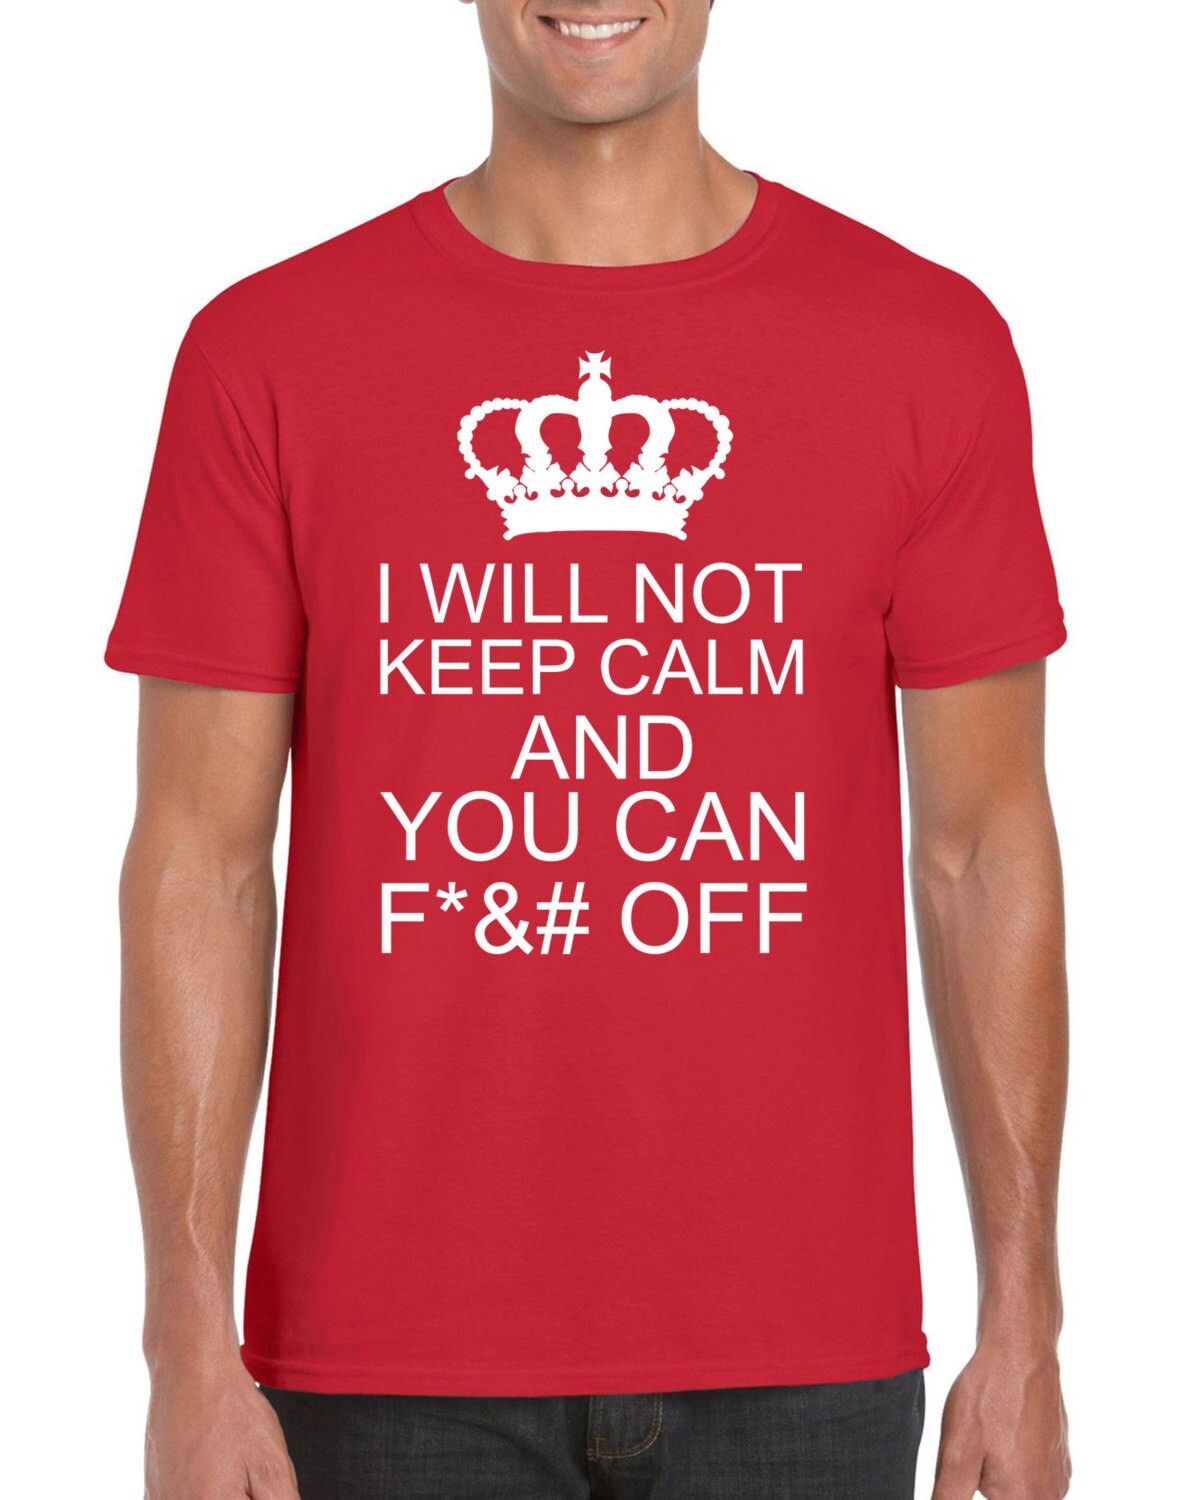 I Will Not Keep Calm and You can F OFF T-Shirt Funny Tees